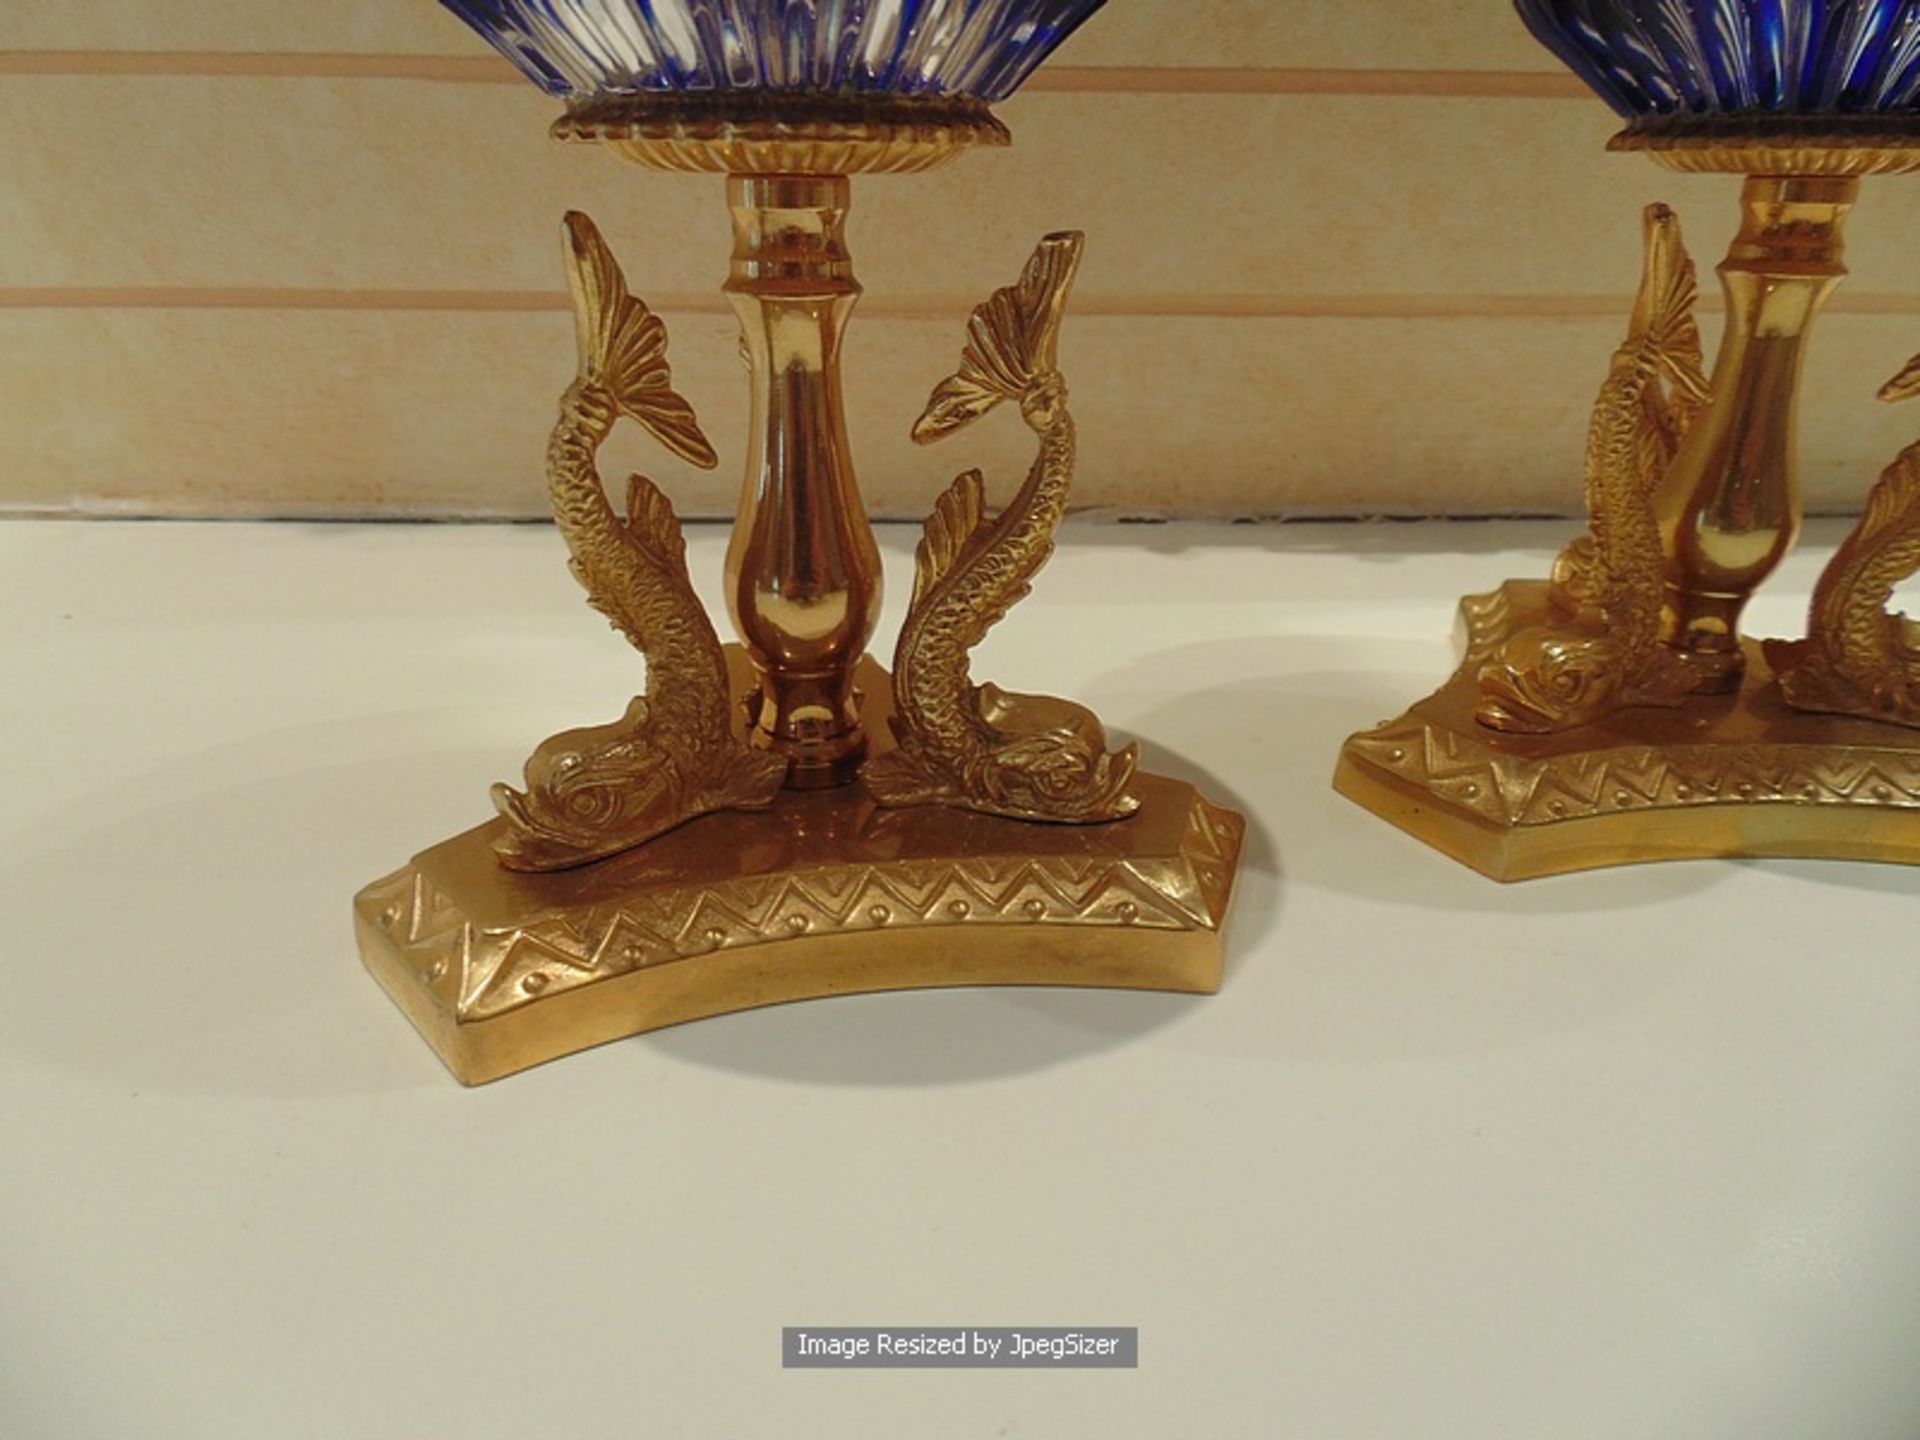 A pair of Baldi Home Jewels The Grand Romanov Double Eagle Egg, the heavily cut crystal egg - Image 2 of 2